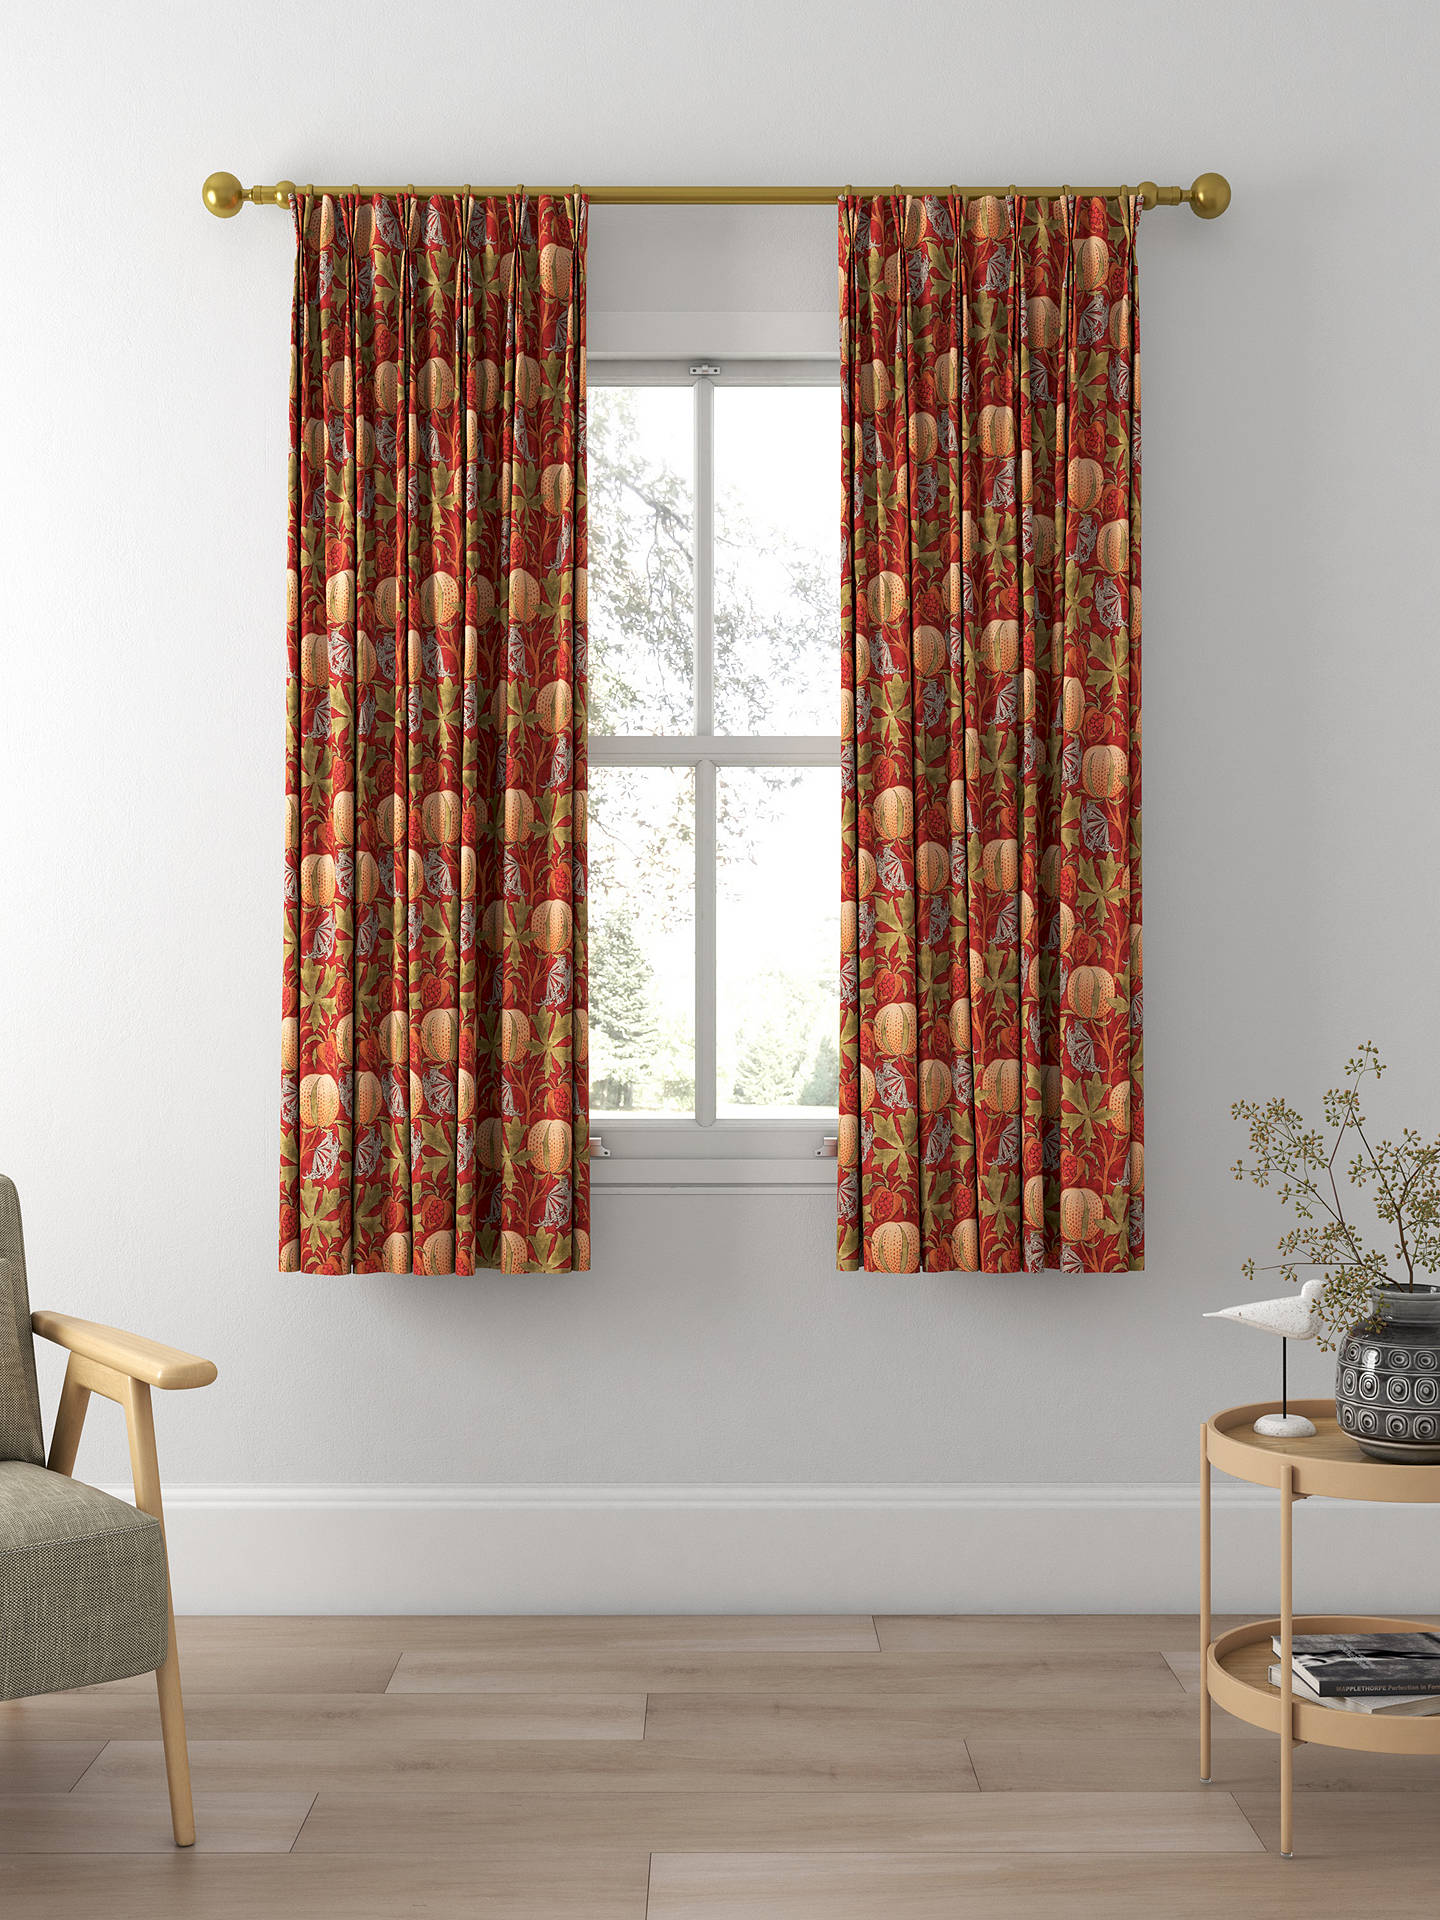 GP & J Baker Pumpkins Made to Measure Curtains, Red/Green